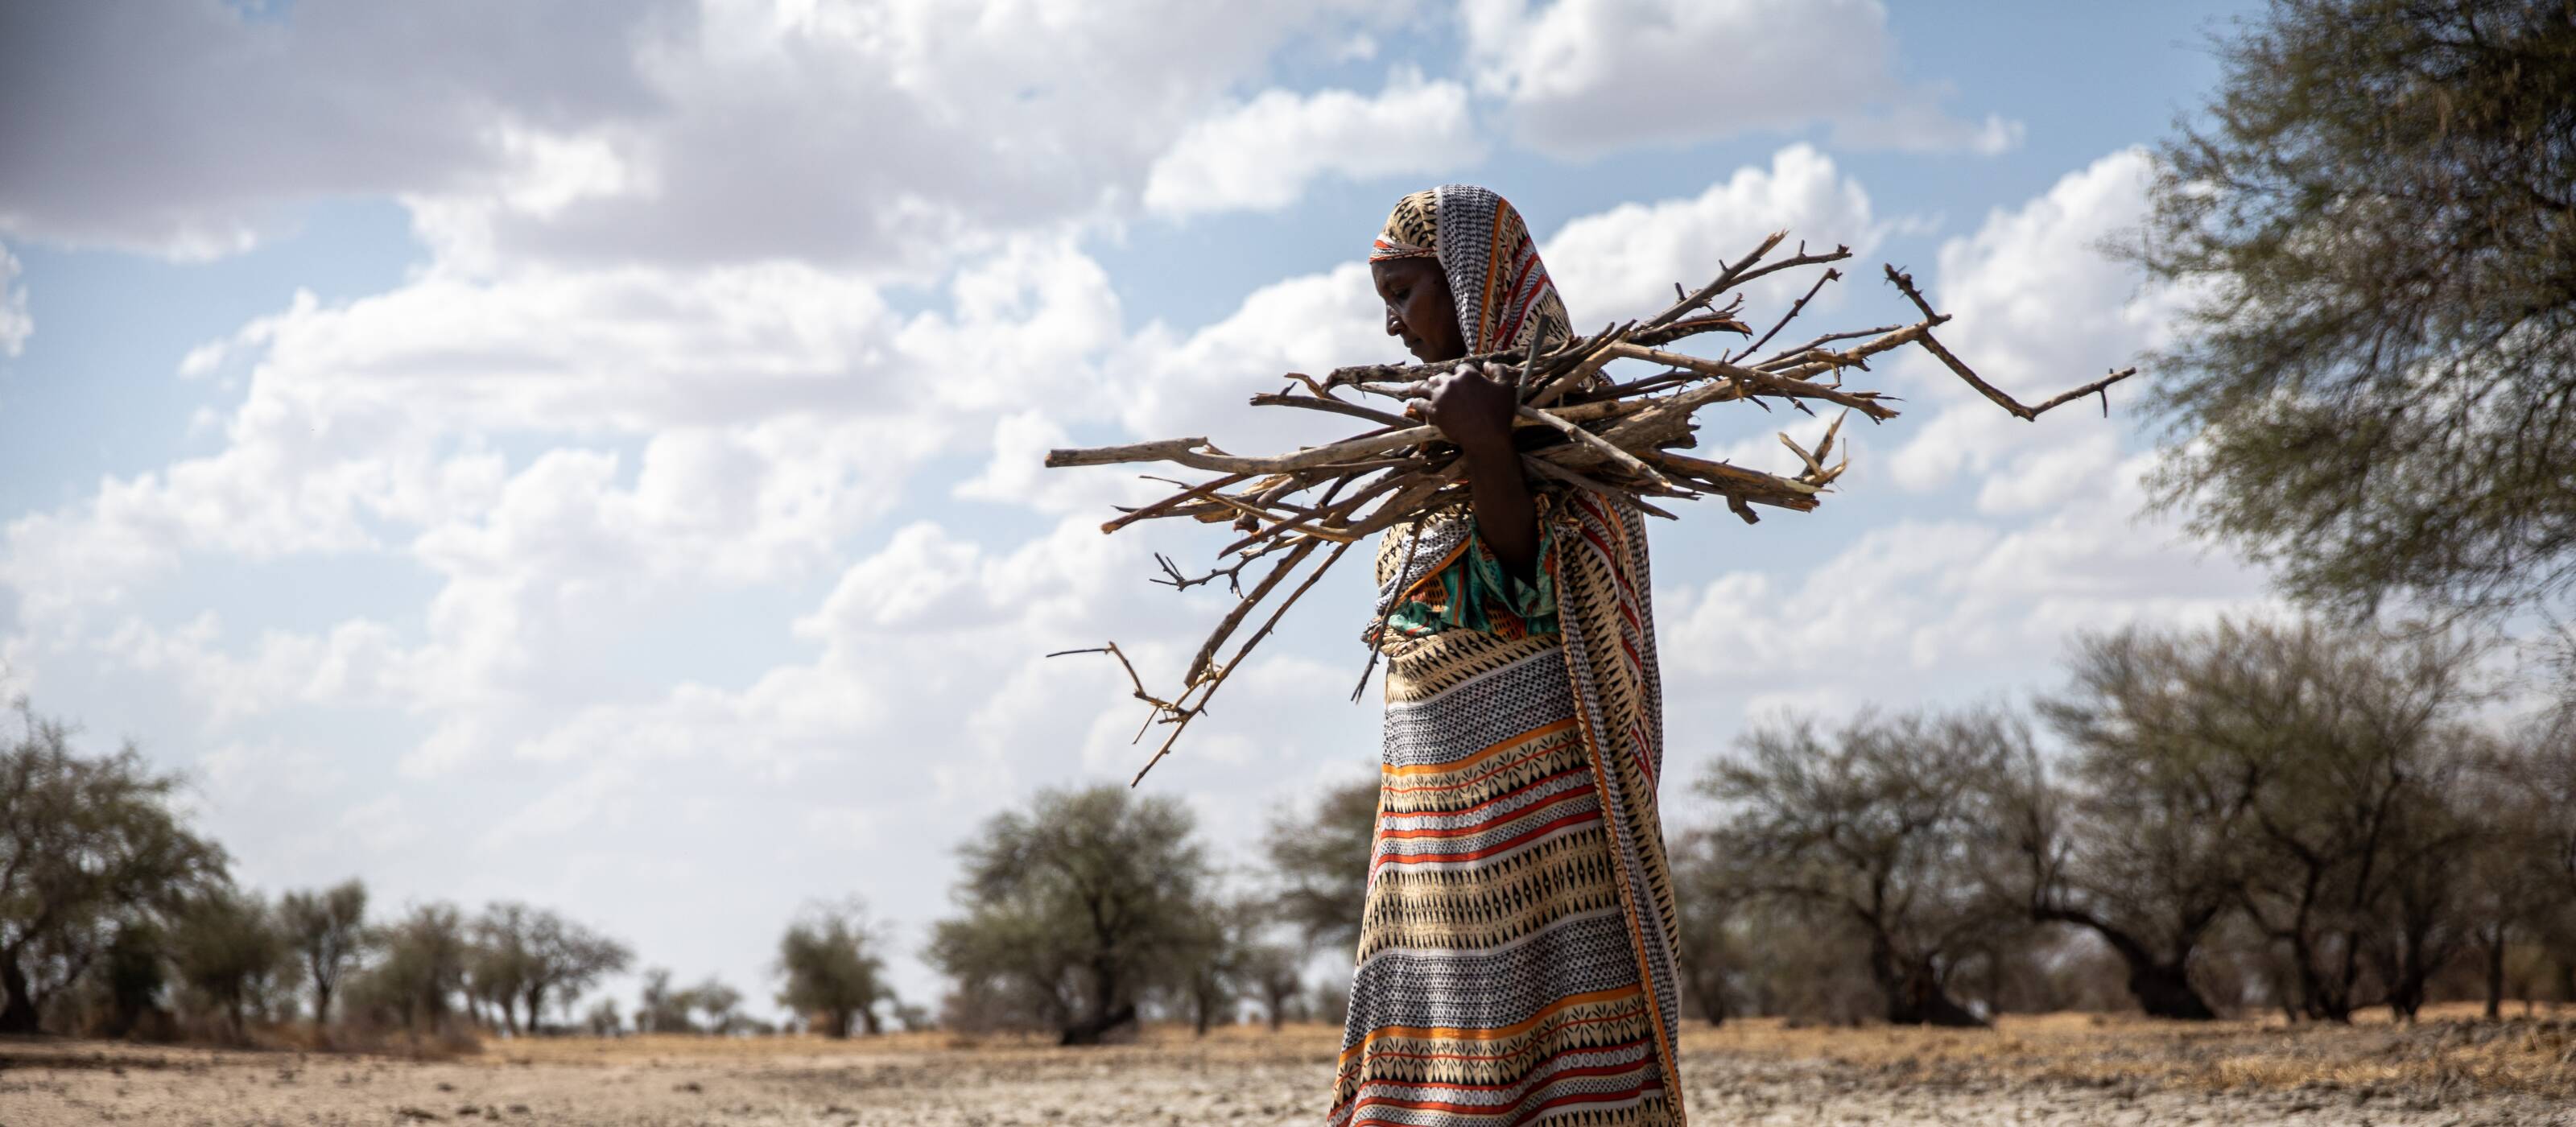 More than 35 million people are at risk of hunger in the Sahel and the Horn of Africa.